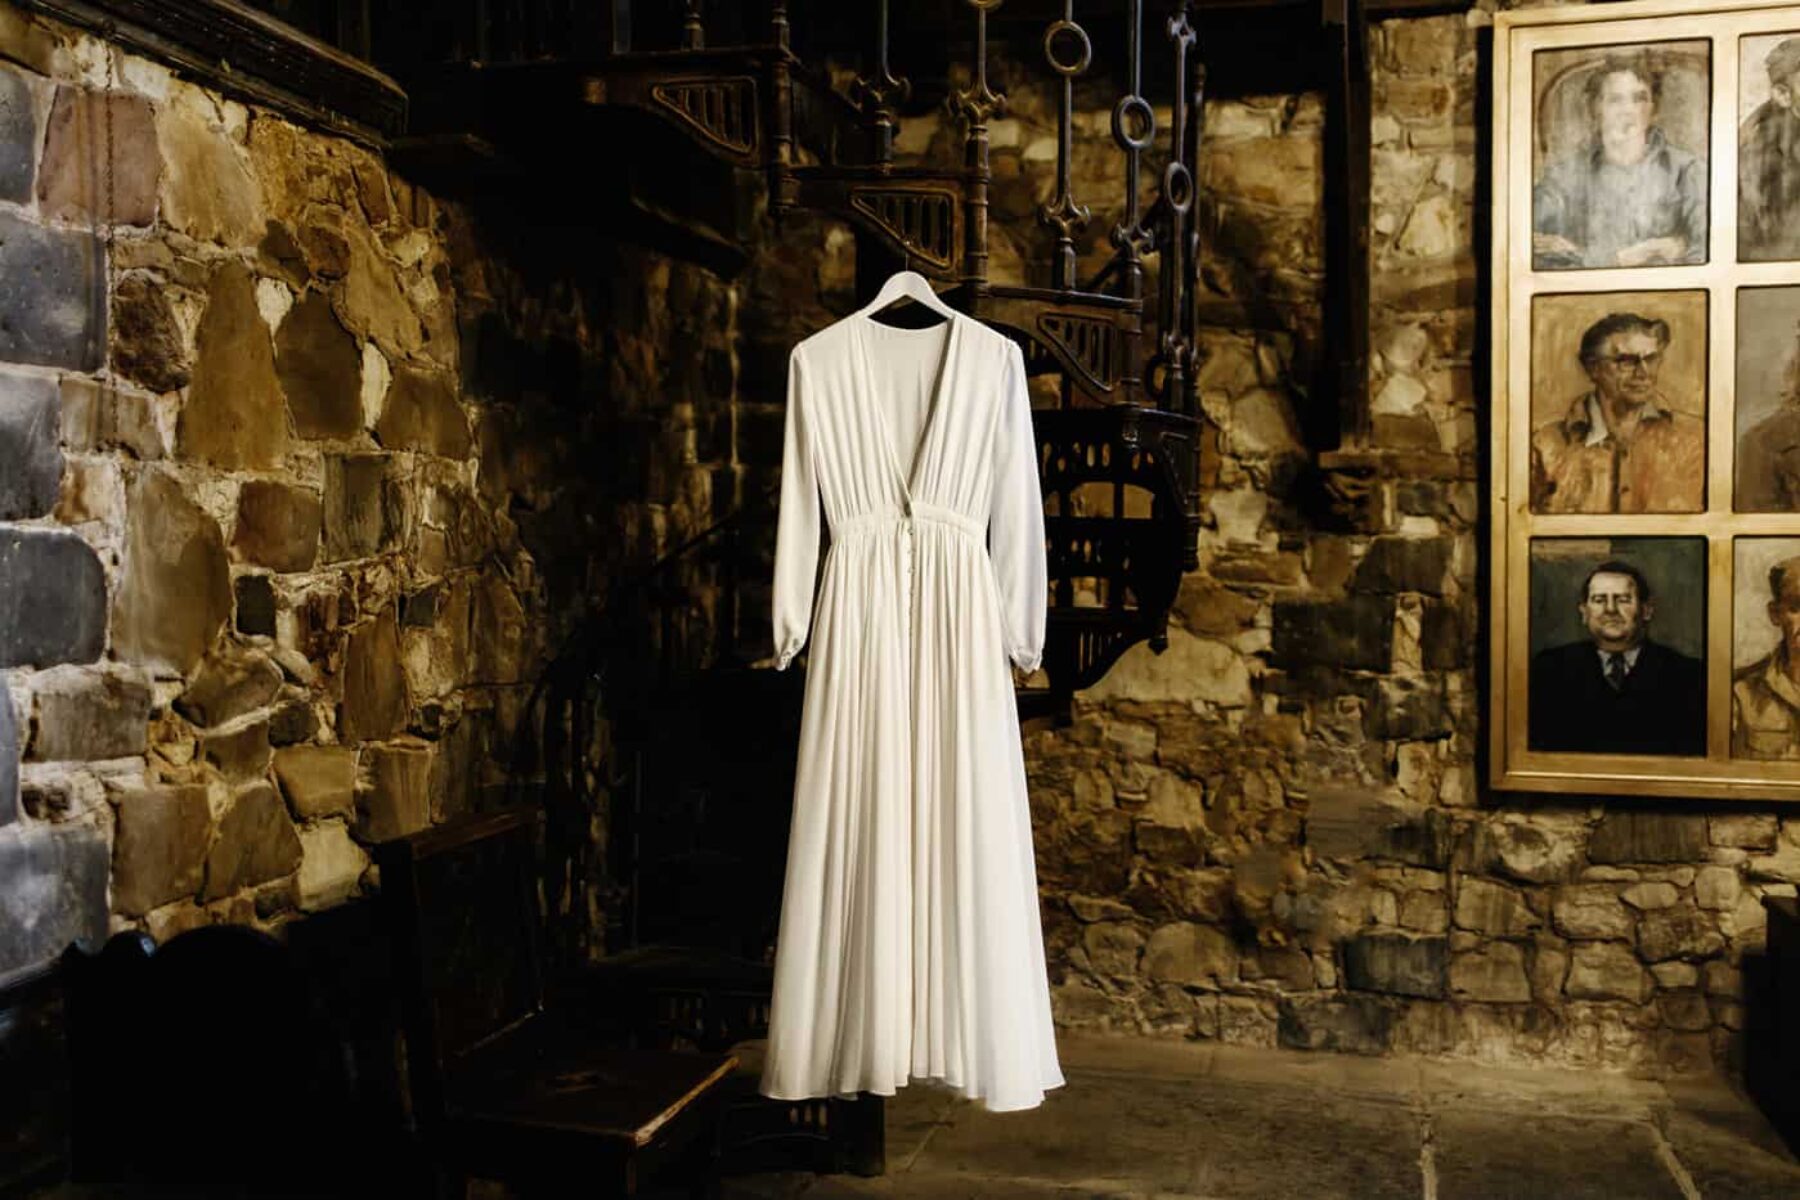 robe-style long sleeve wedding dress by Houghton NYC